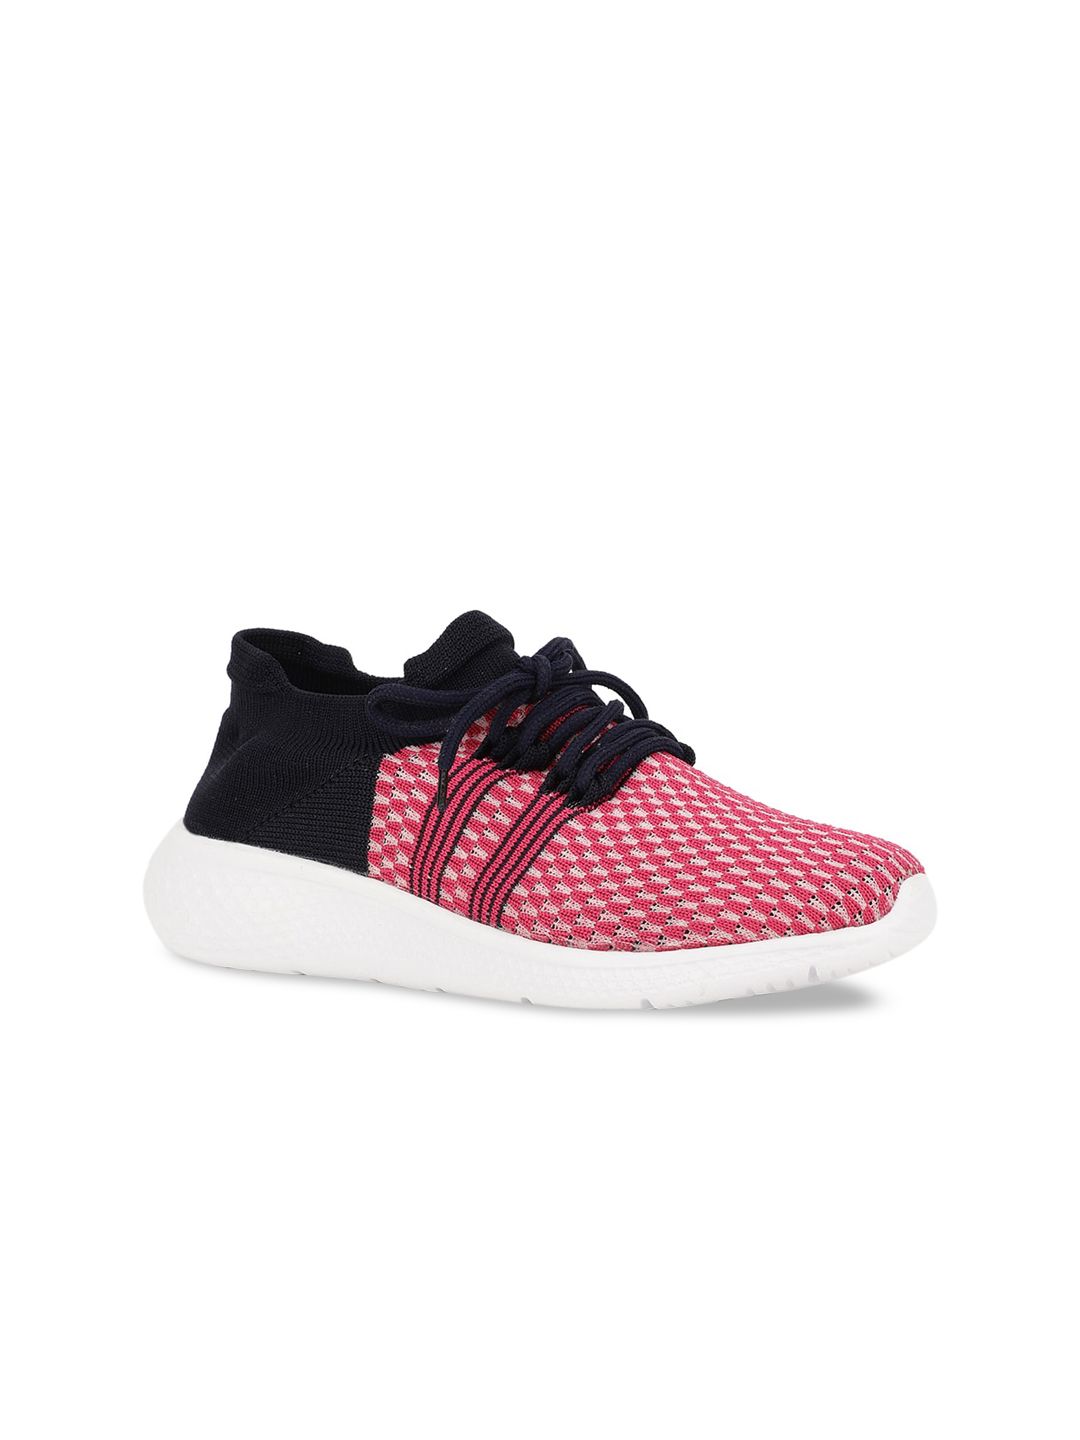 HERE&NOW Women Red Woven Design Sneakers Price in India